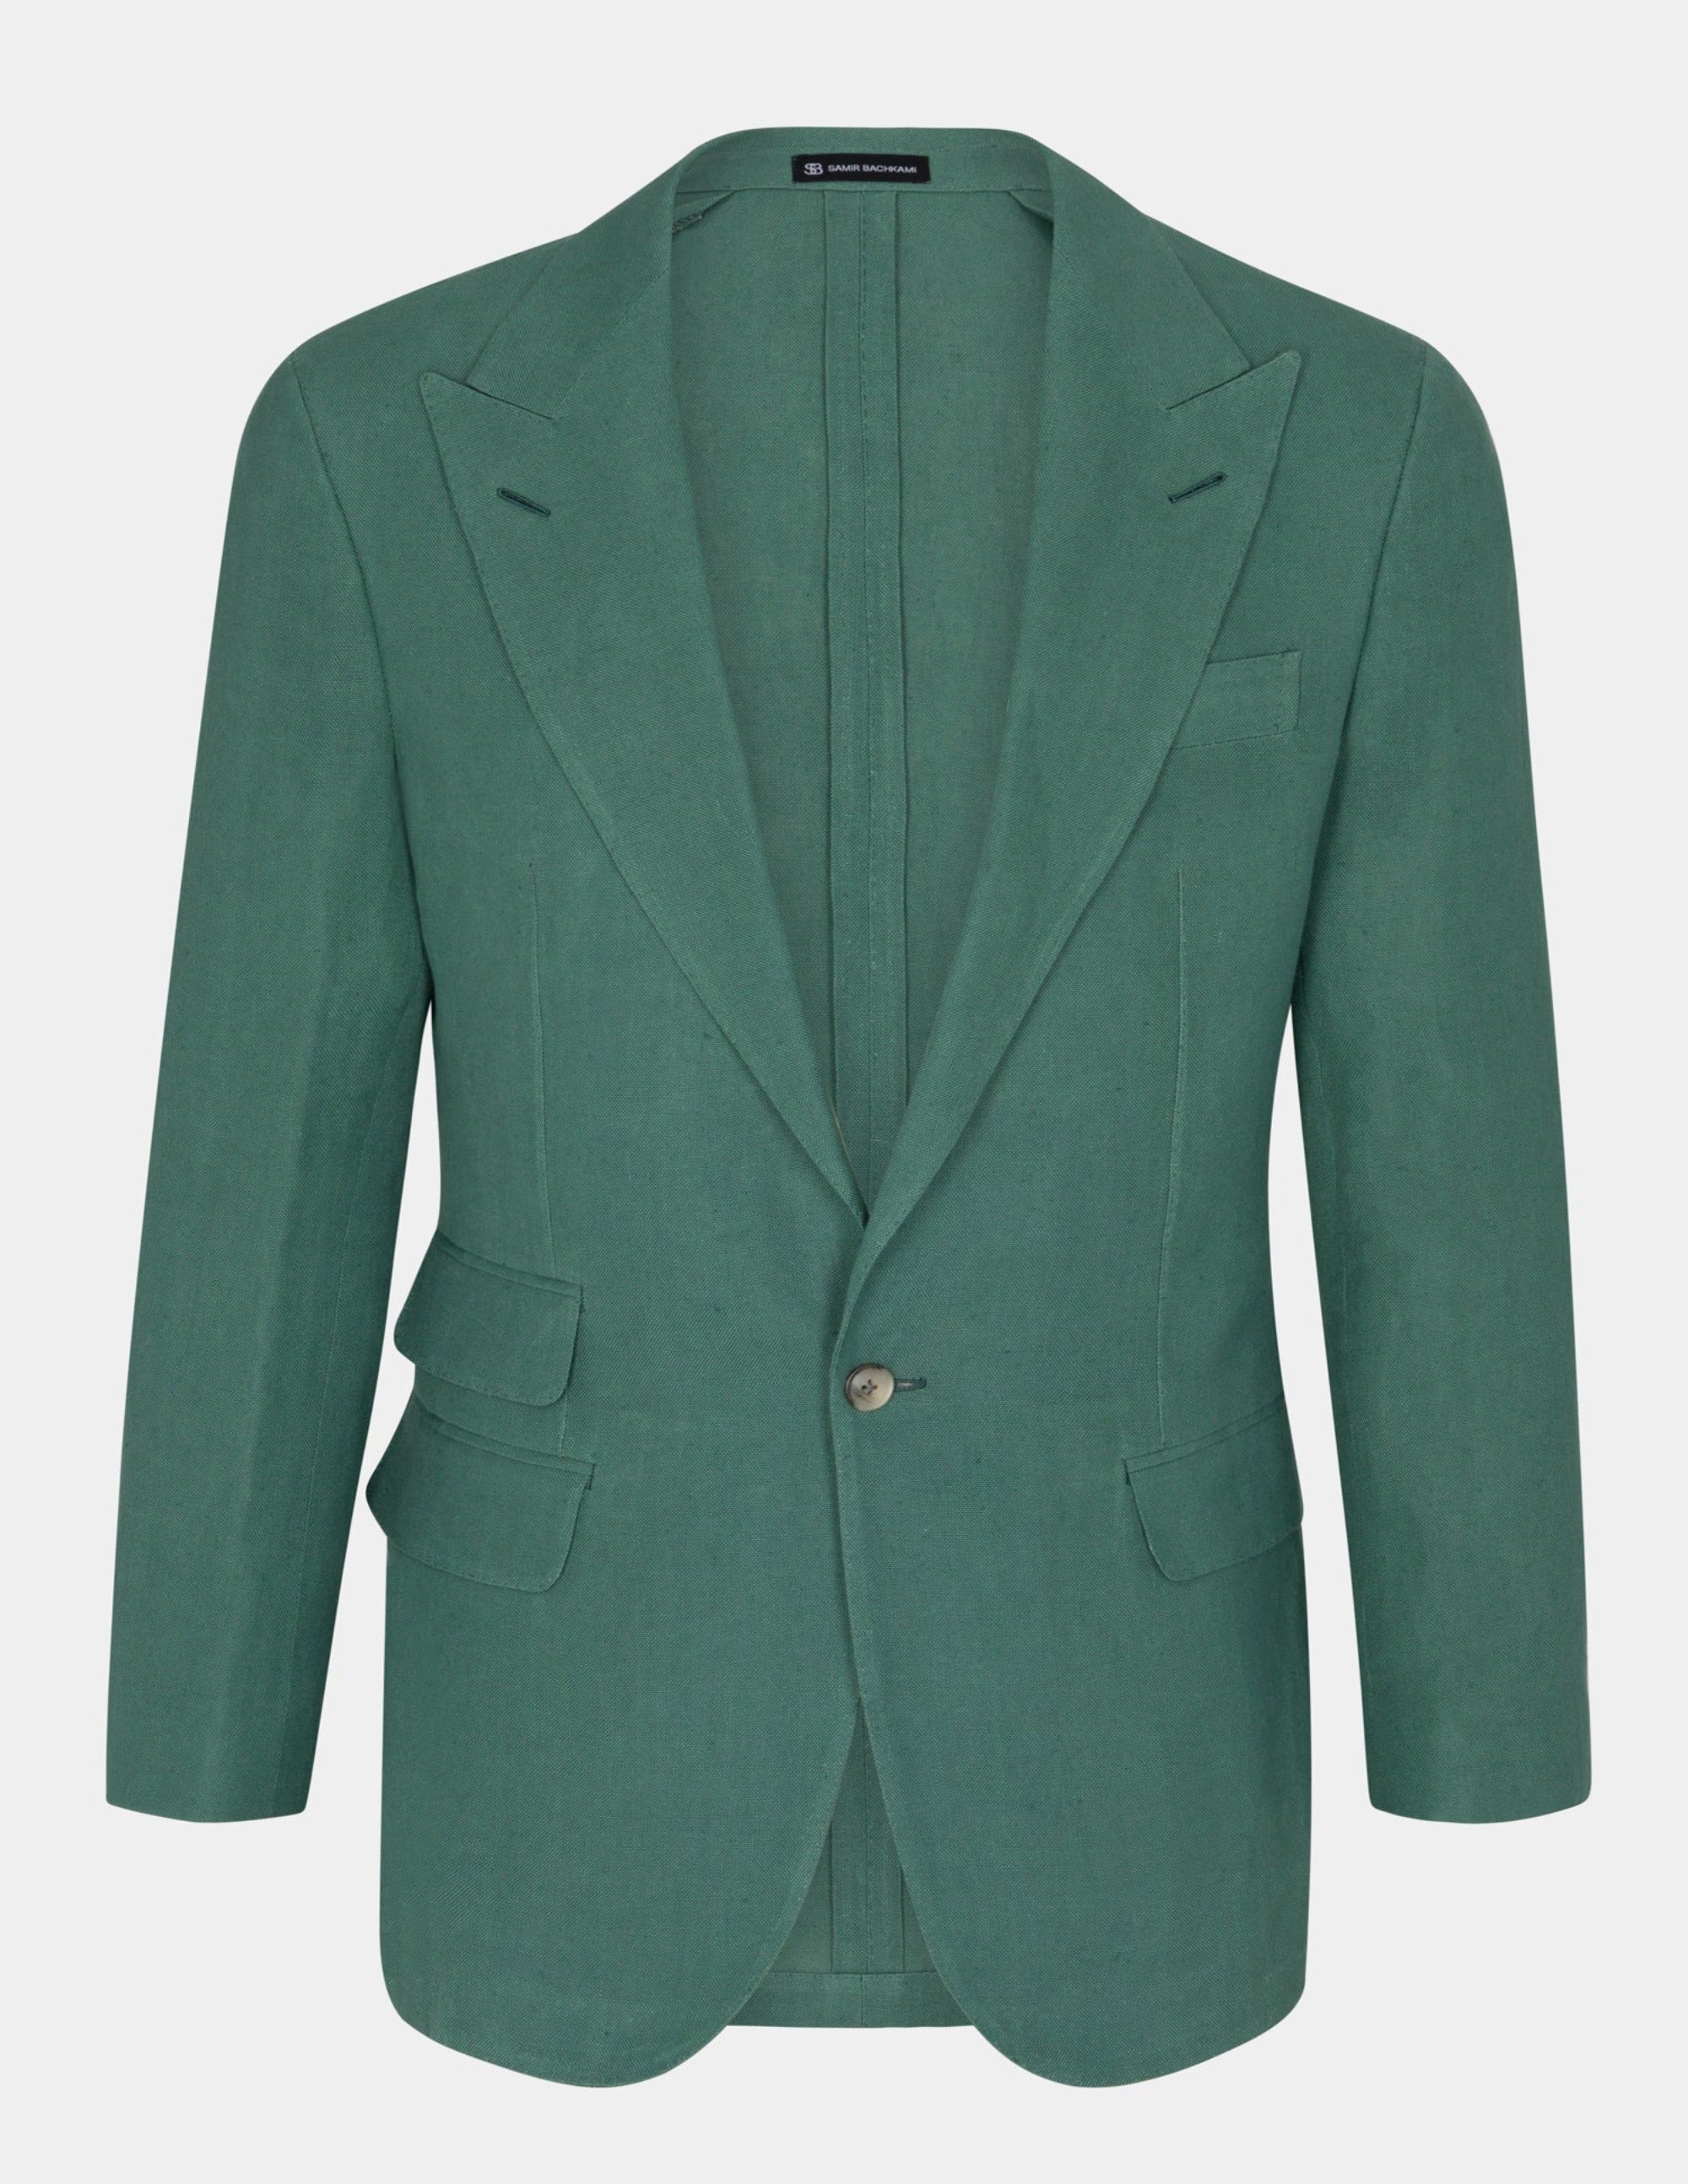 Pale Teal Linen Single Breasted Suit - Samir Bachkami